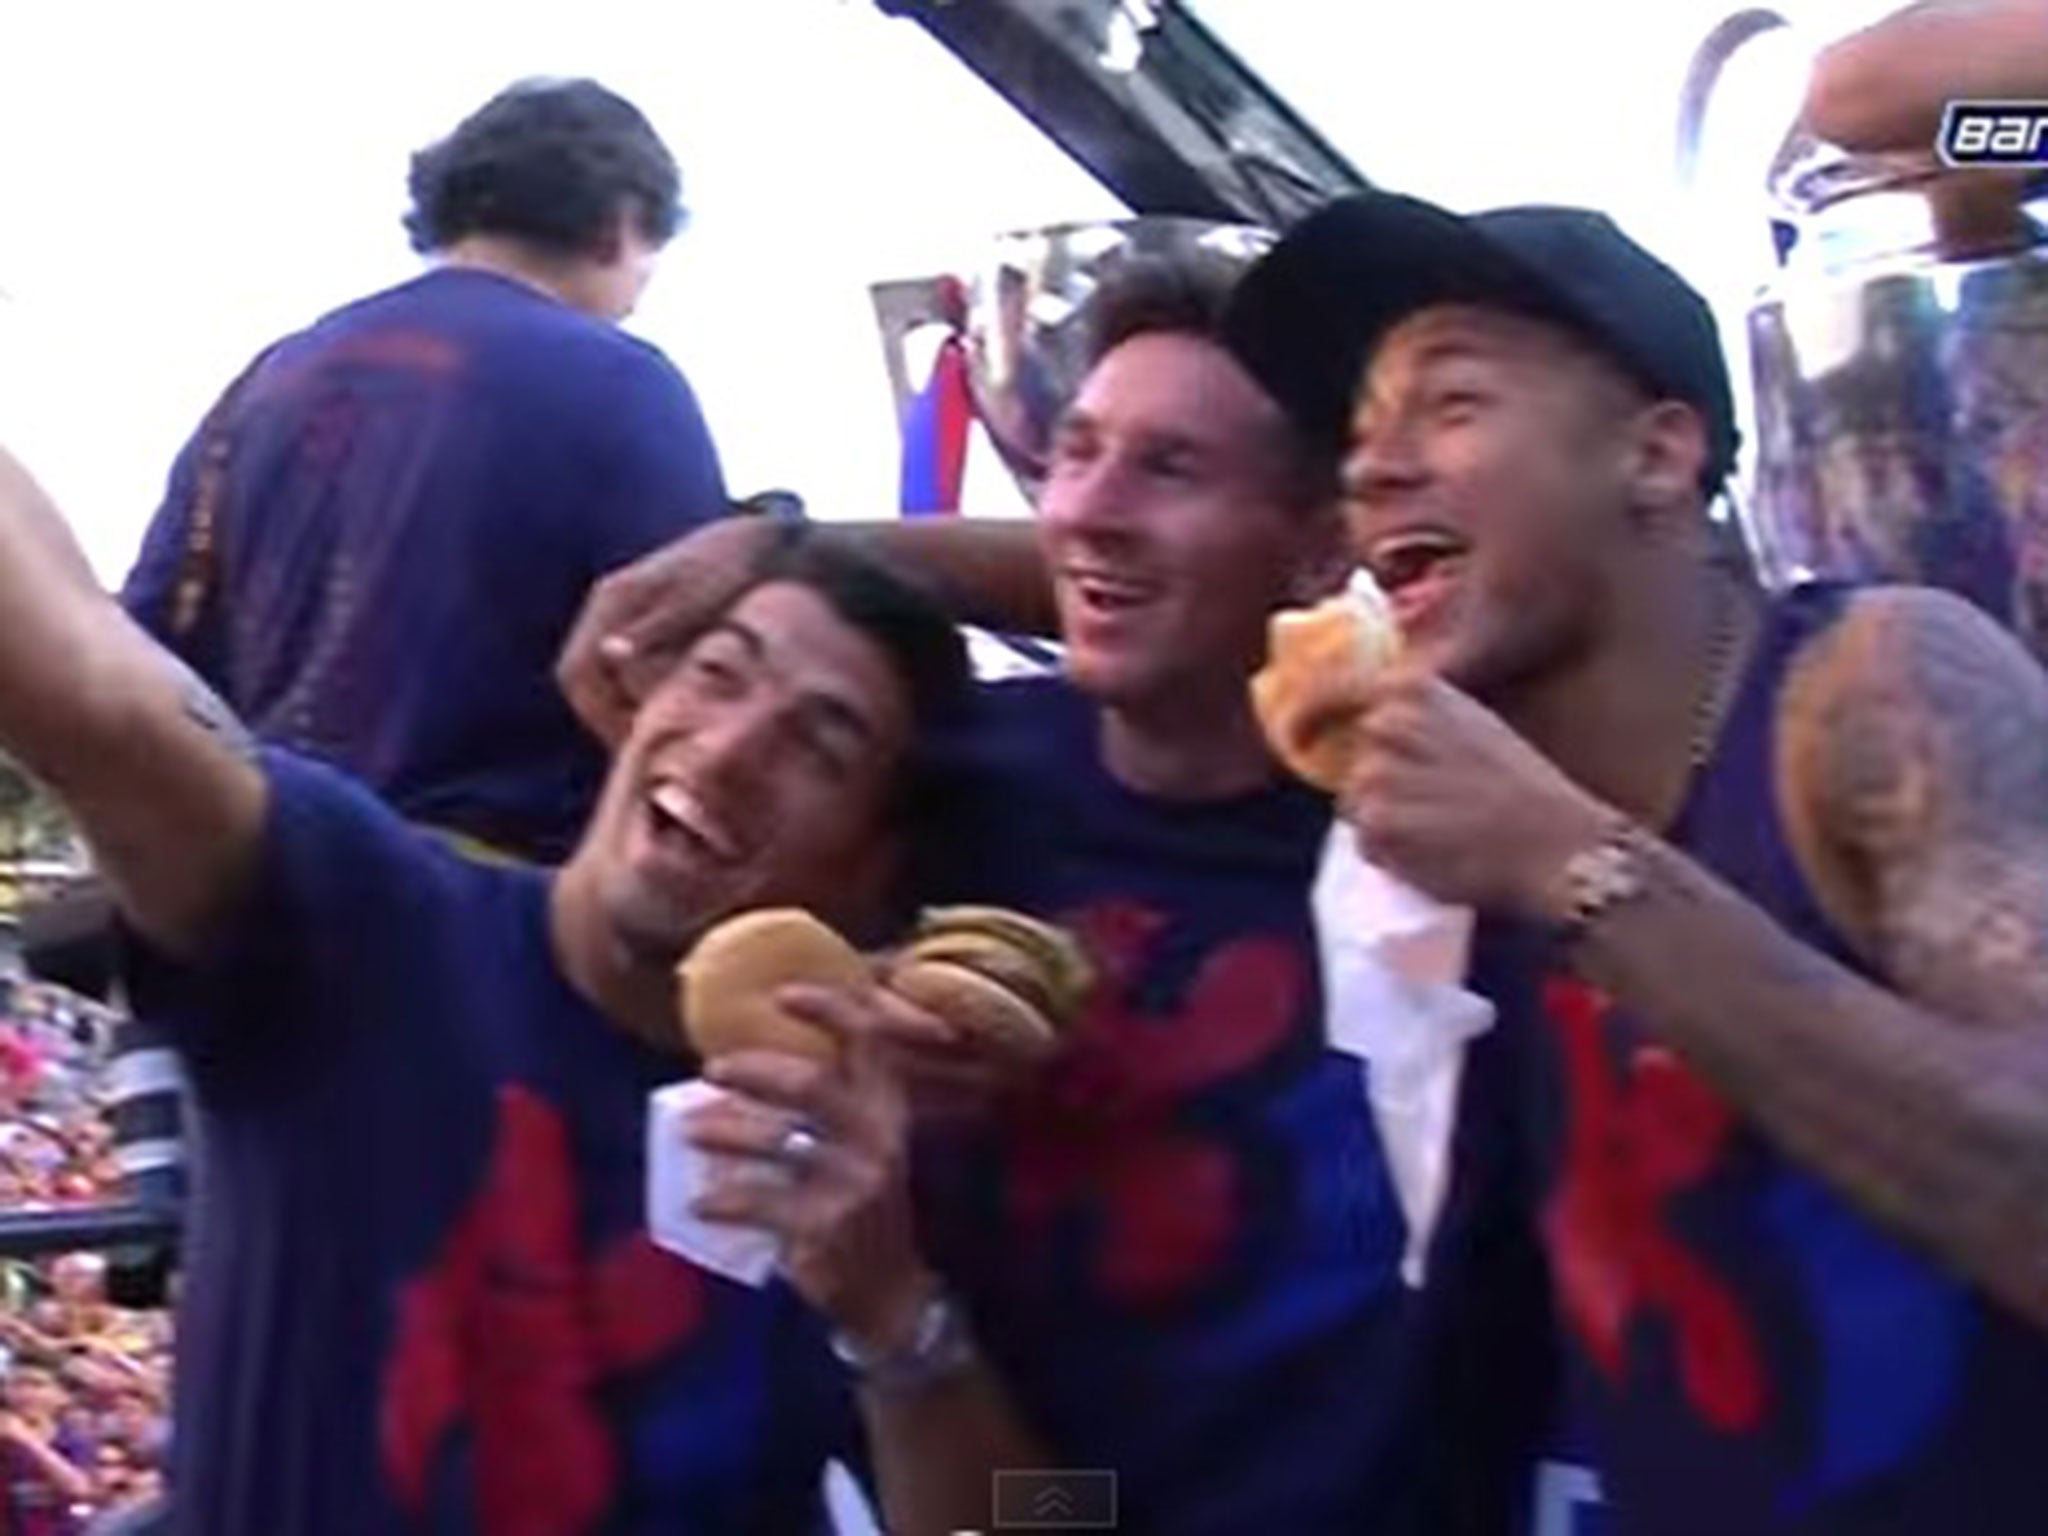 Luis Suarez, Lionel Messi and Neymar pose with their burgers